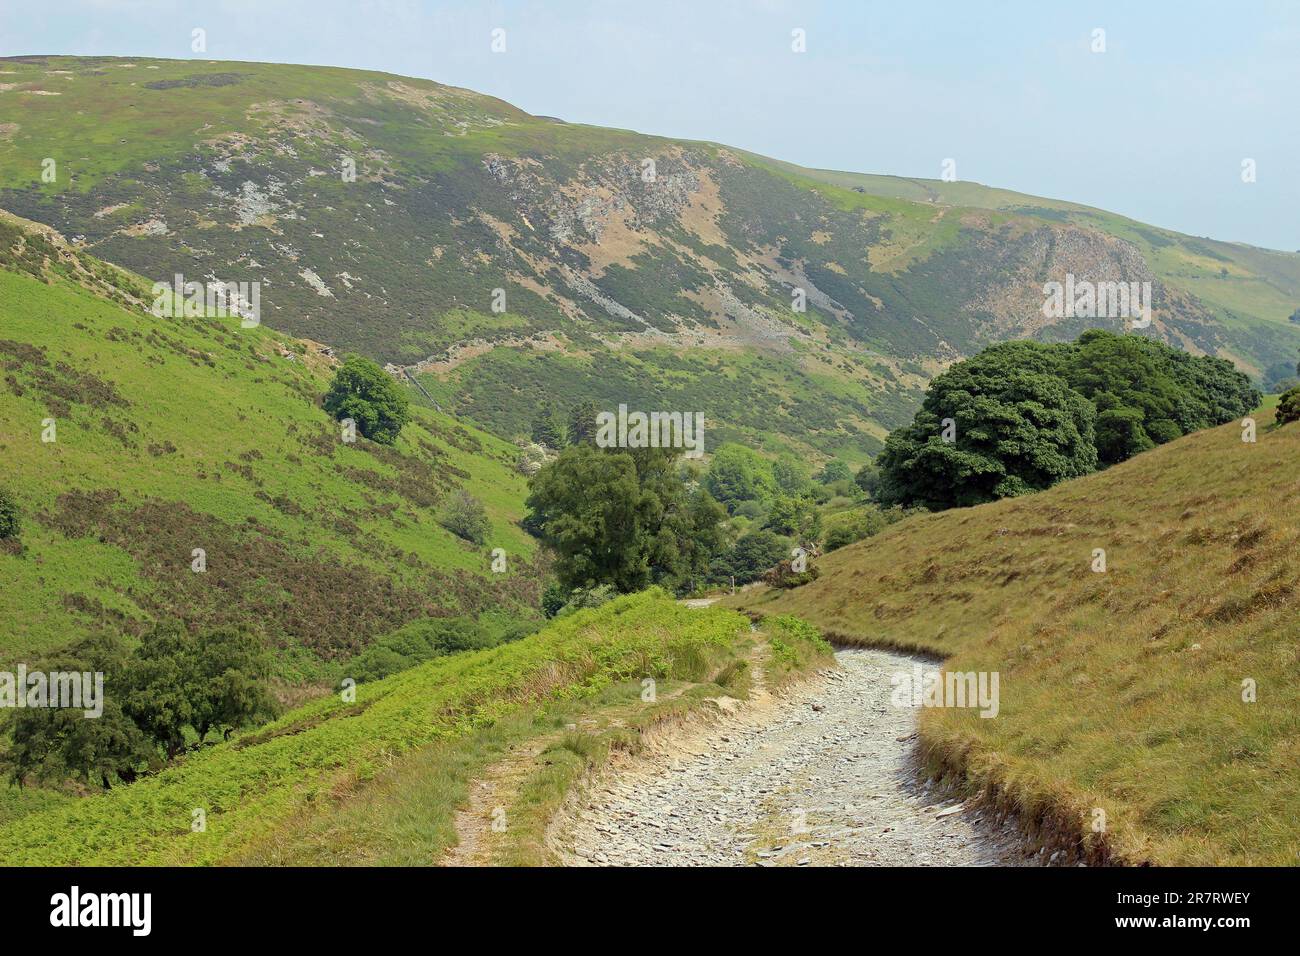 Footpath In the Berwyns above the village of Pentre Bach, Ceiriog Valley, Wales - Graig Fawr in the distance Stock Photo